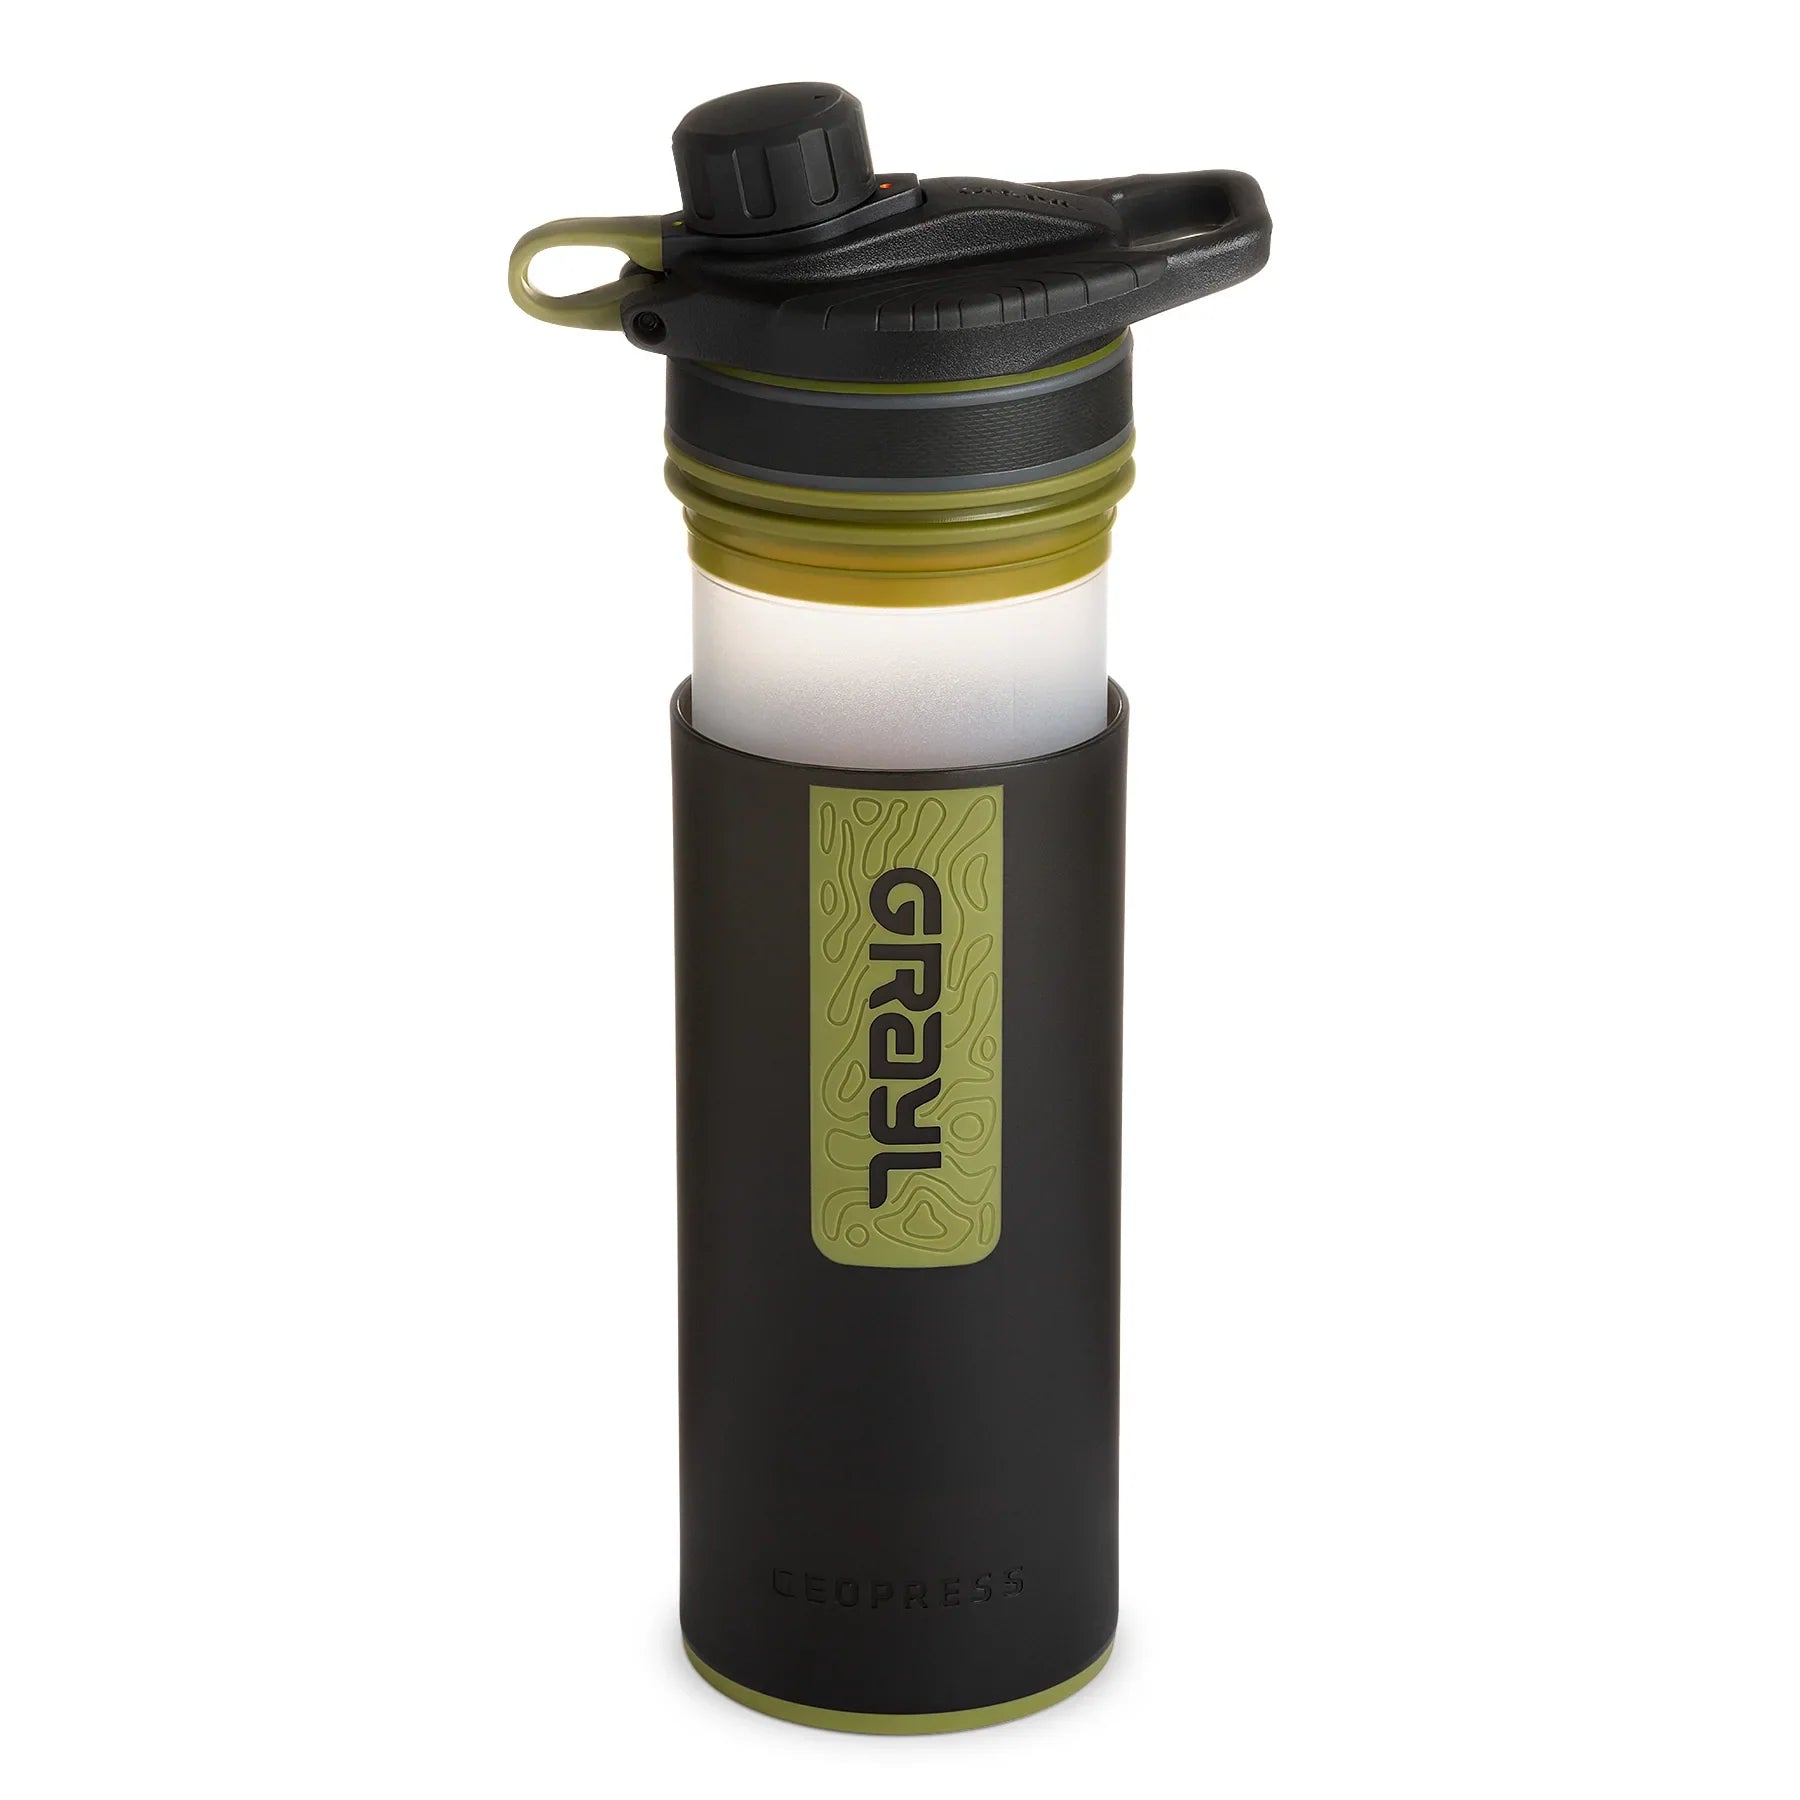 24oz GeoPress® Purifier - Nature Edition Big Adventure Outfitters